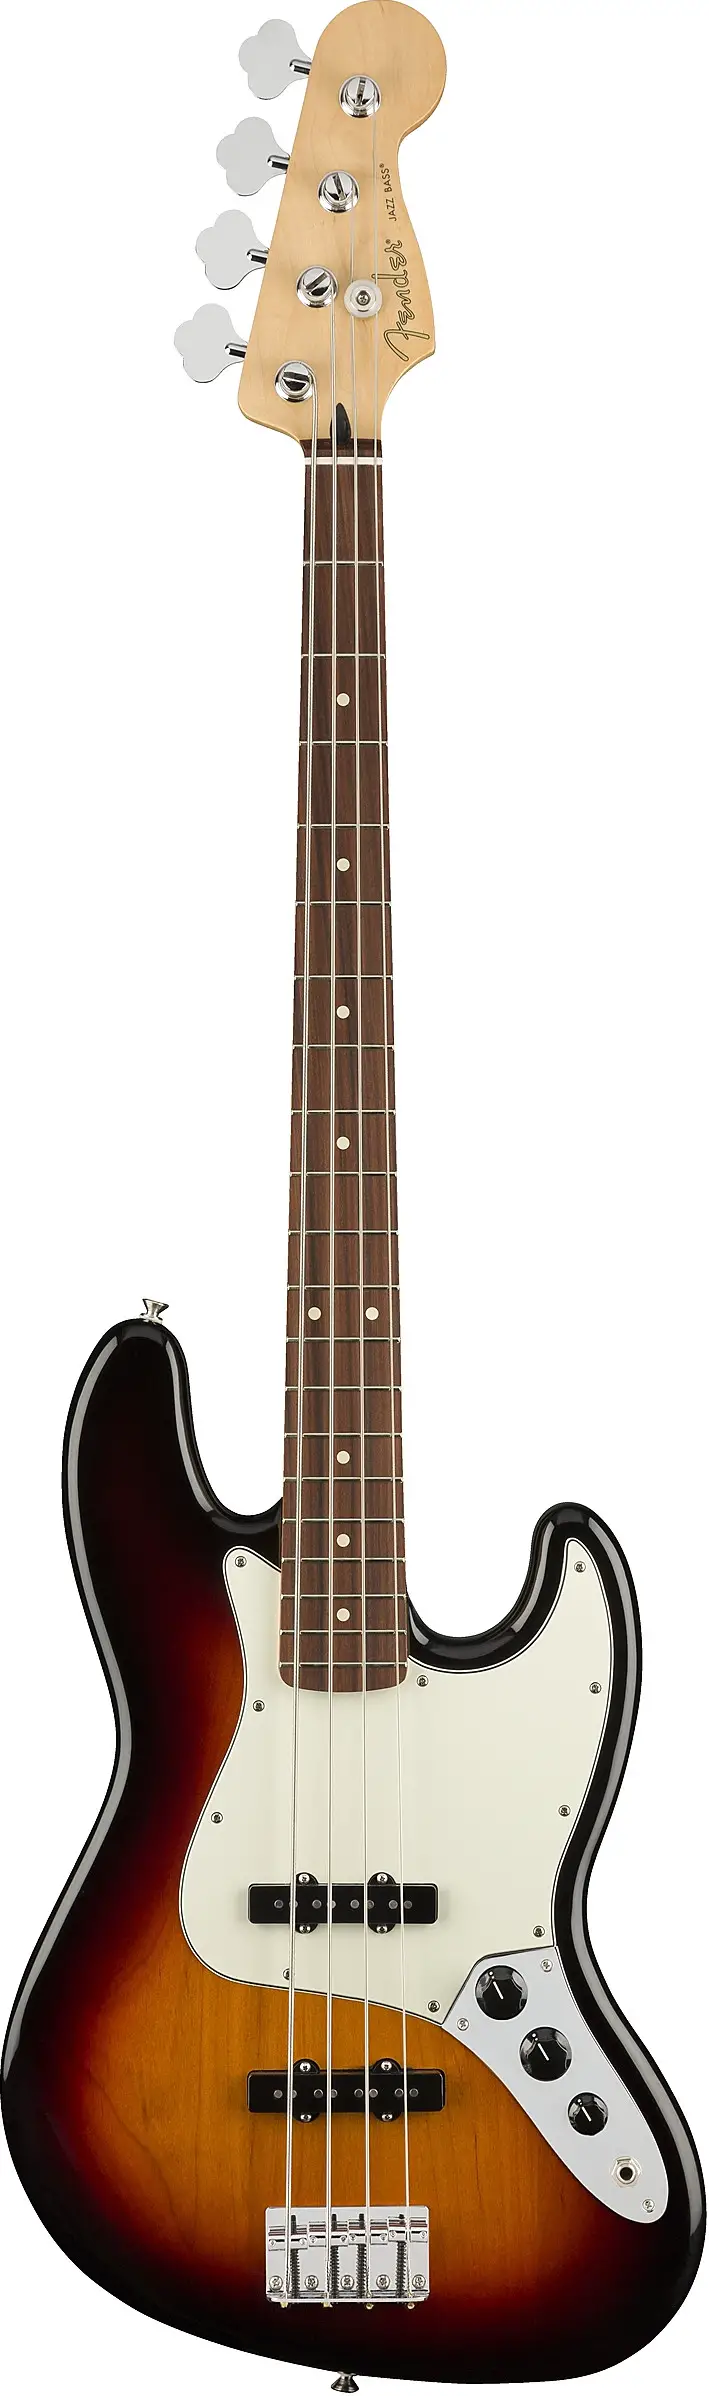 Player Jazz Bass� by Fender